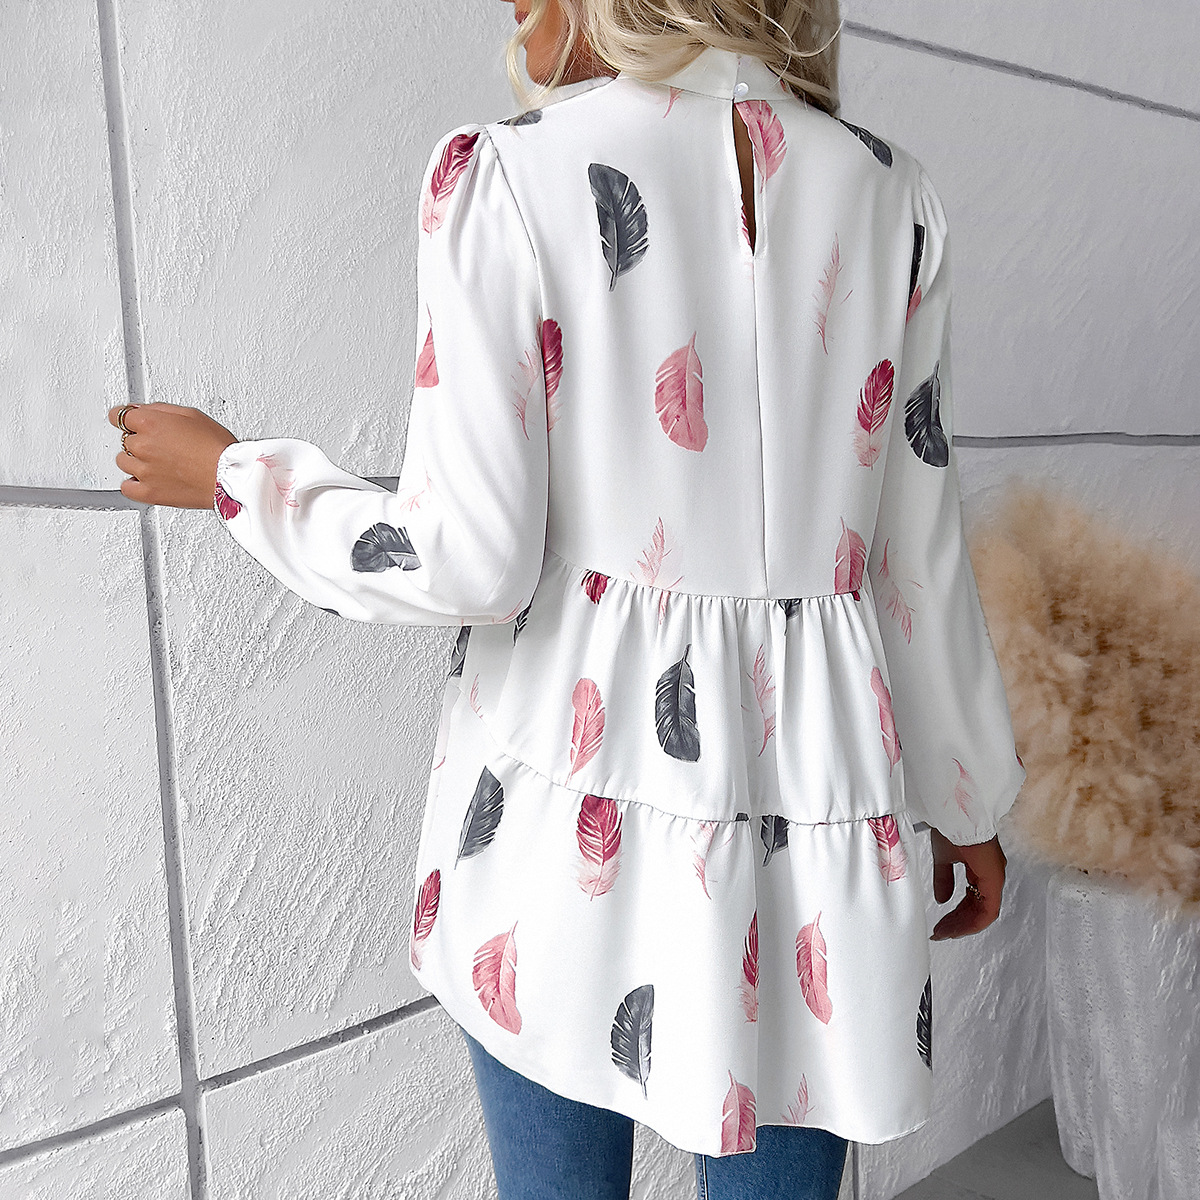 Autumn and winter commuting printing shirt for women